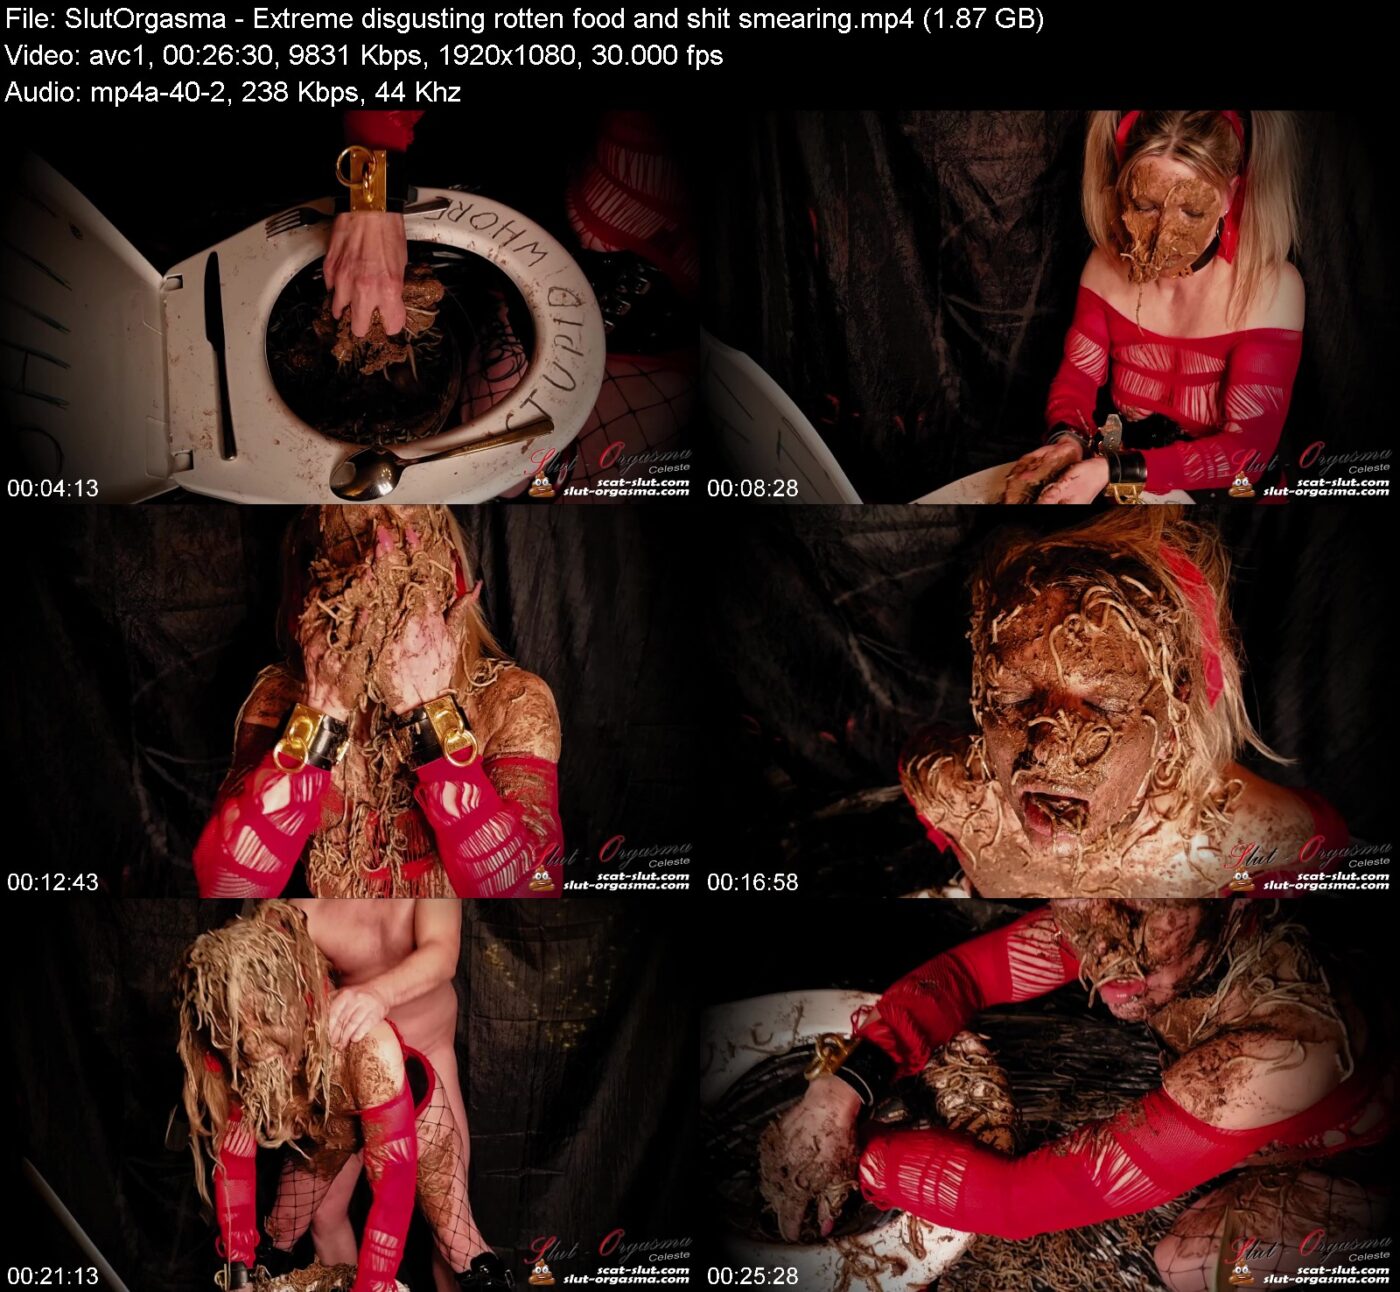 Actress: SlutOrgasma. Title and Studio: Extreme disgusting rotten food and shit smearing